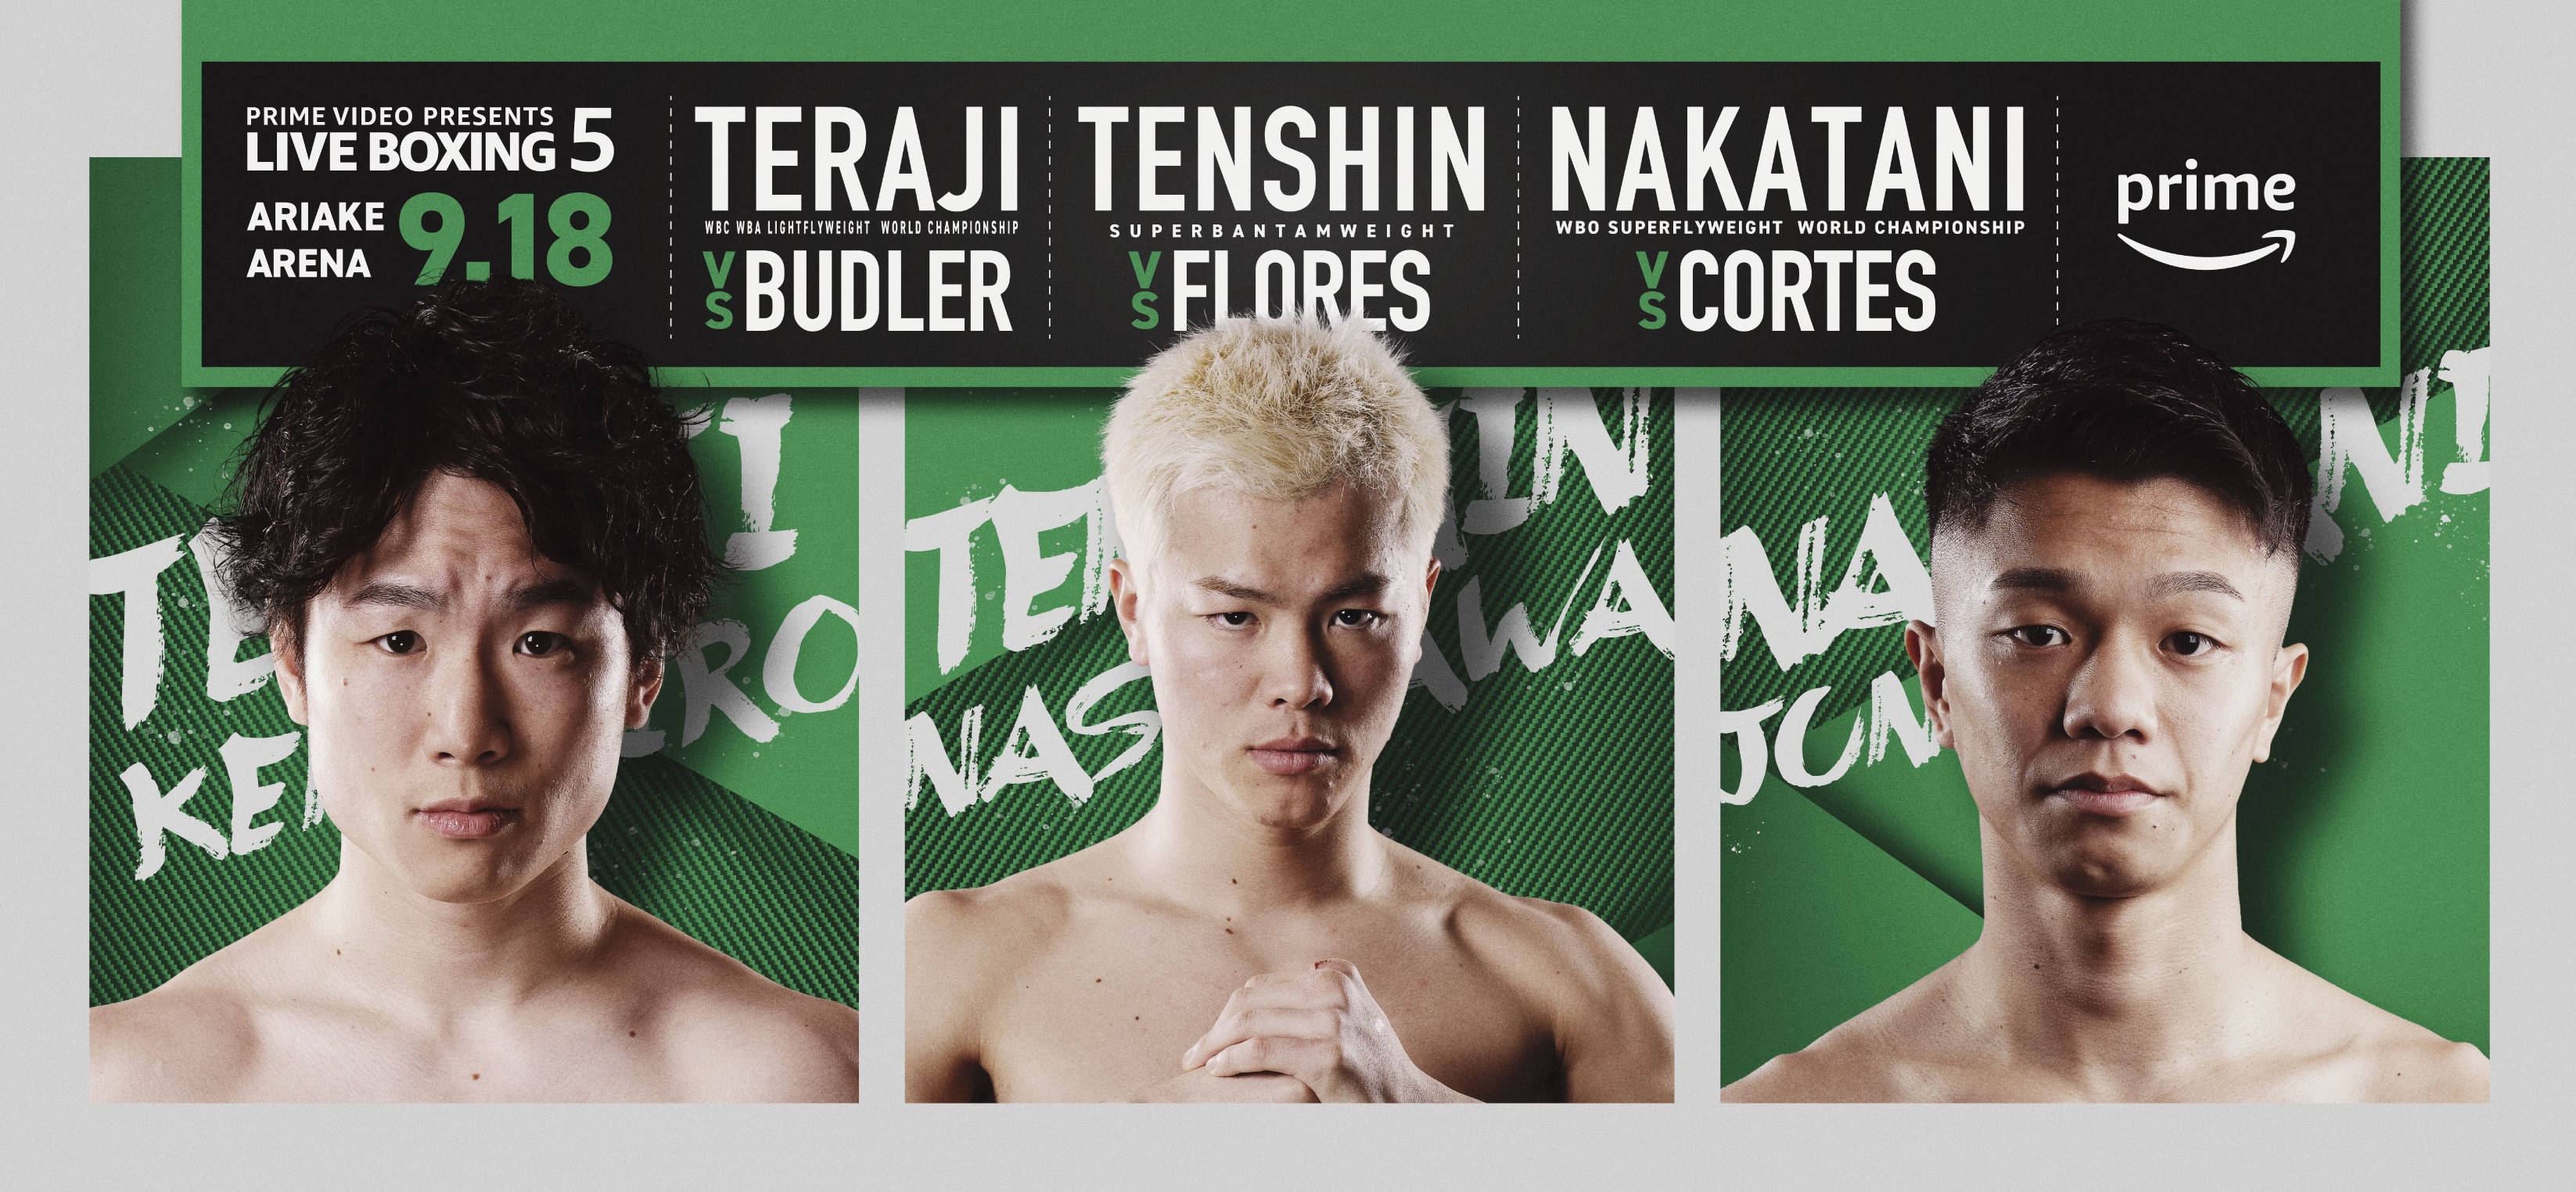 Prime Video Presents Live Boxing 5 』那須川天心のボクシング2戦目は、9戦全勝7KOのメキシコの新鋭と対戦！｜アマゾンジャパン合同会社のプレスリリース